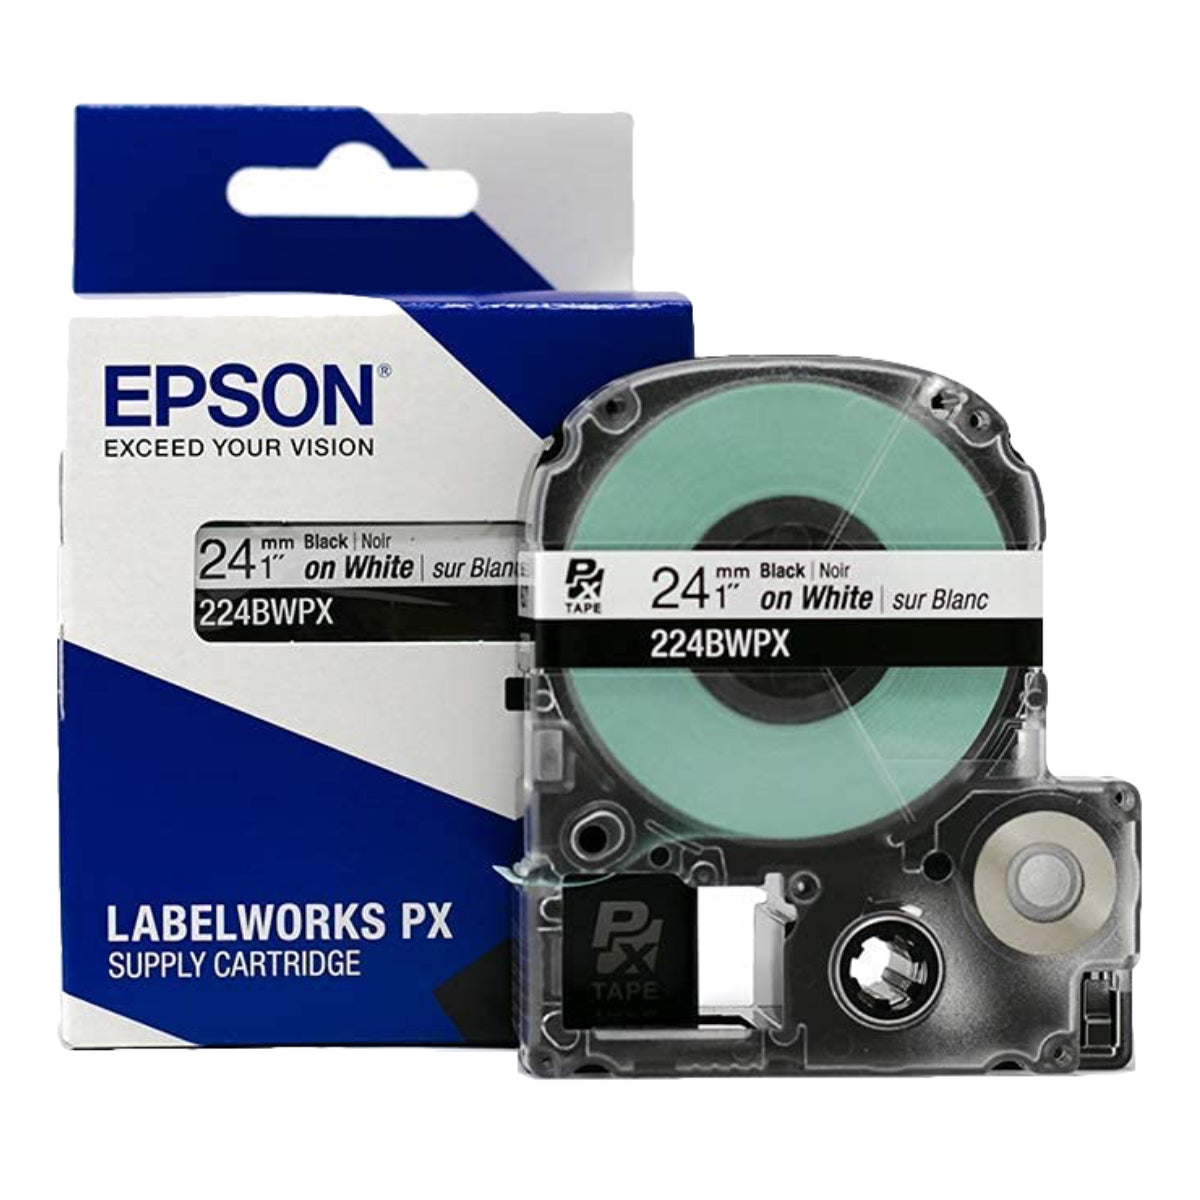 Epson LABELWORKS PX 24mm 224BWPX Tape, Black on White